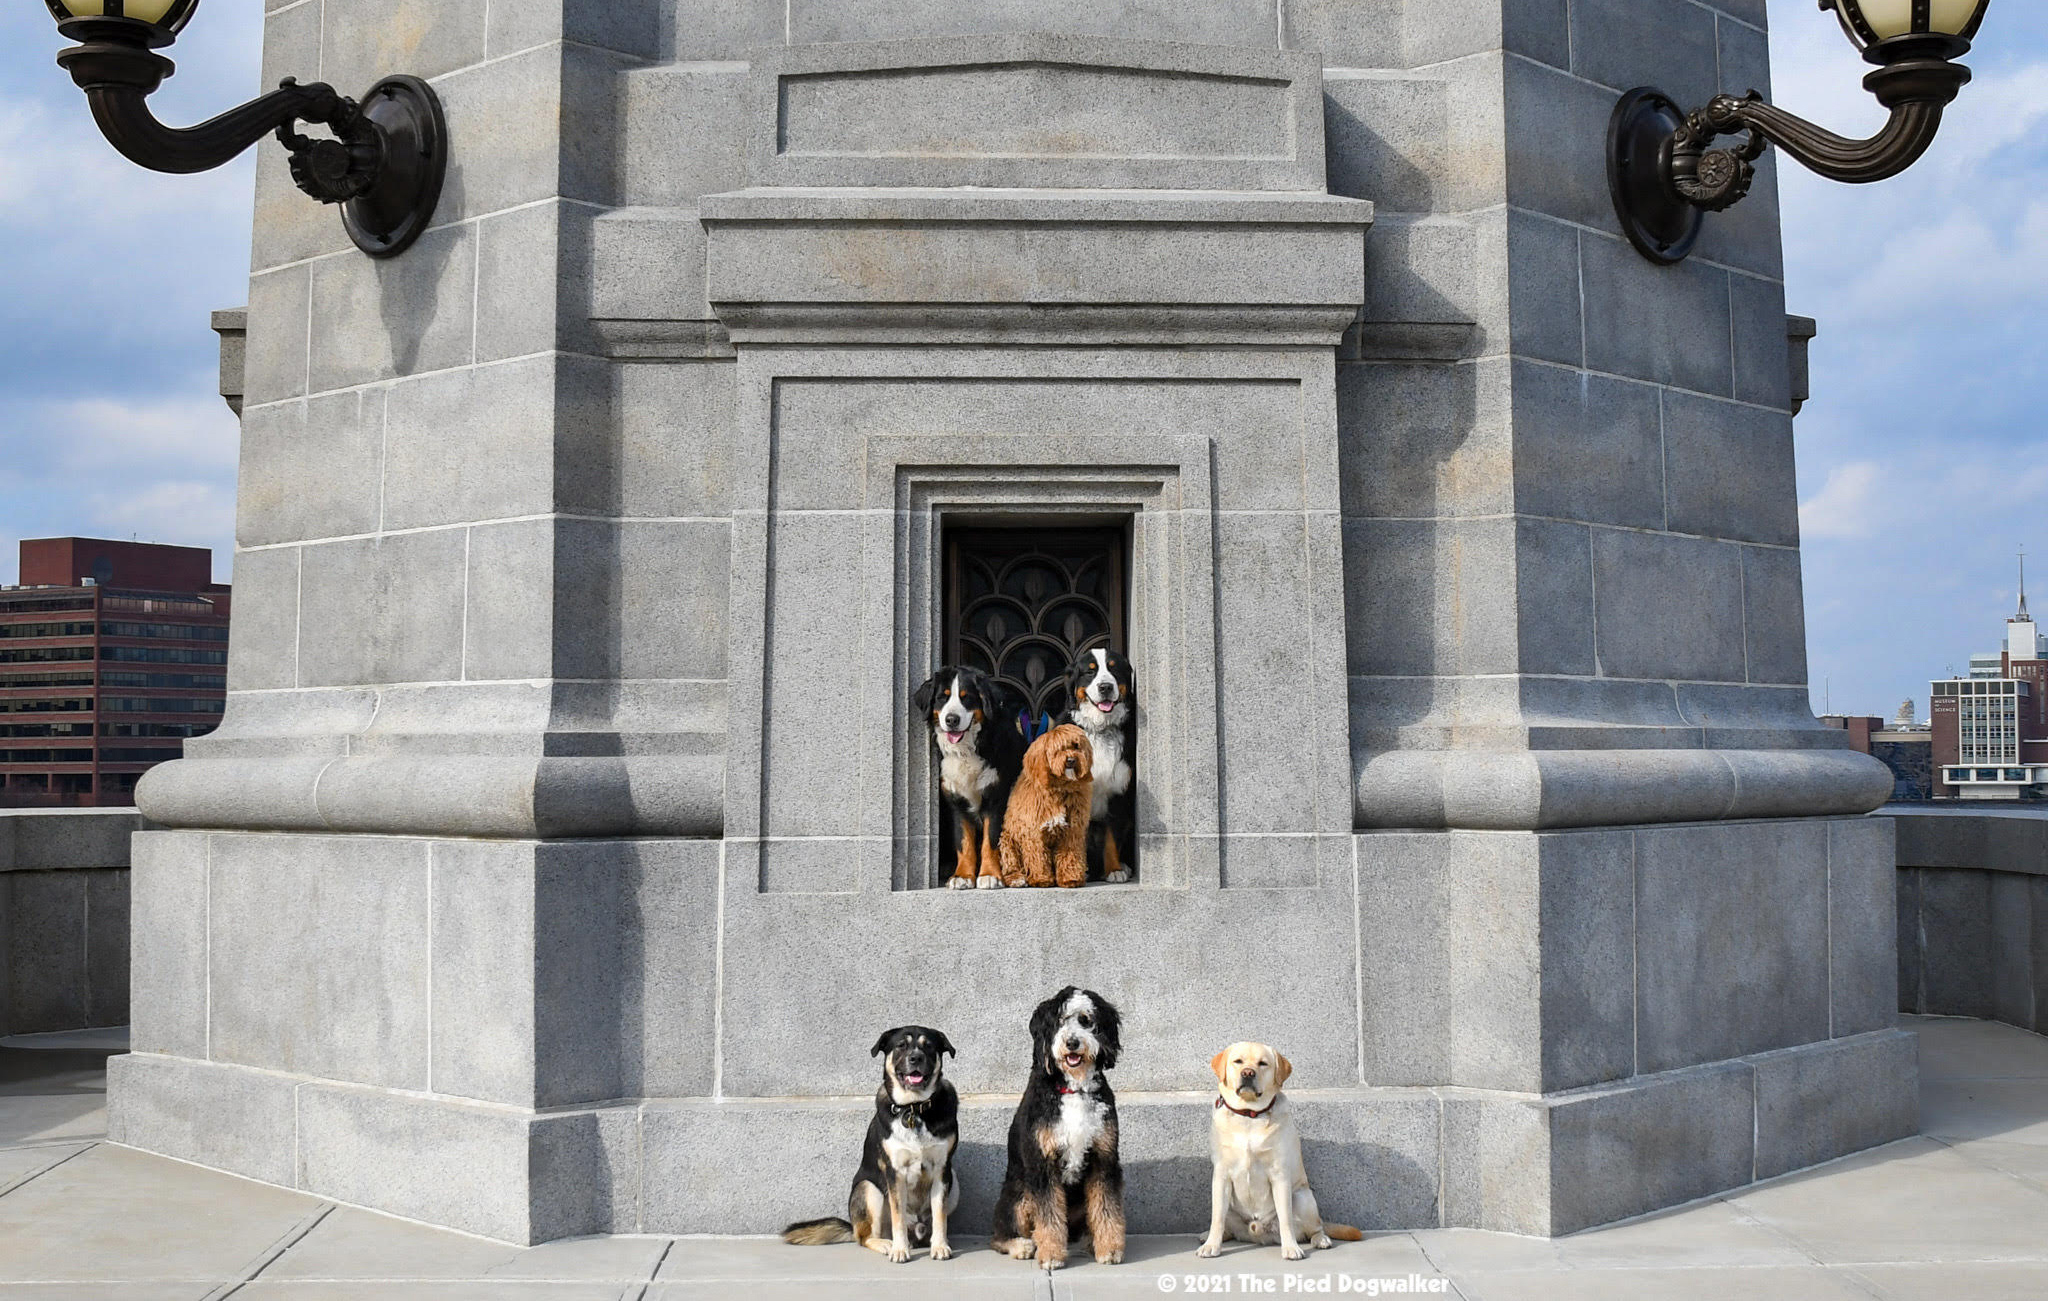 Here S The Story Behind That Photo Of All Those Good Dogs Posing On The Longfellow Bridge The Boston Globe